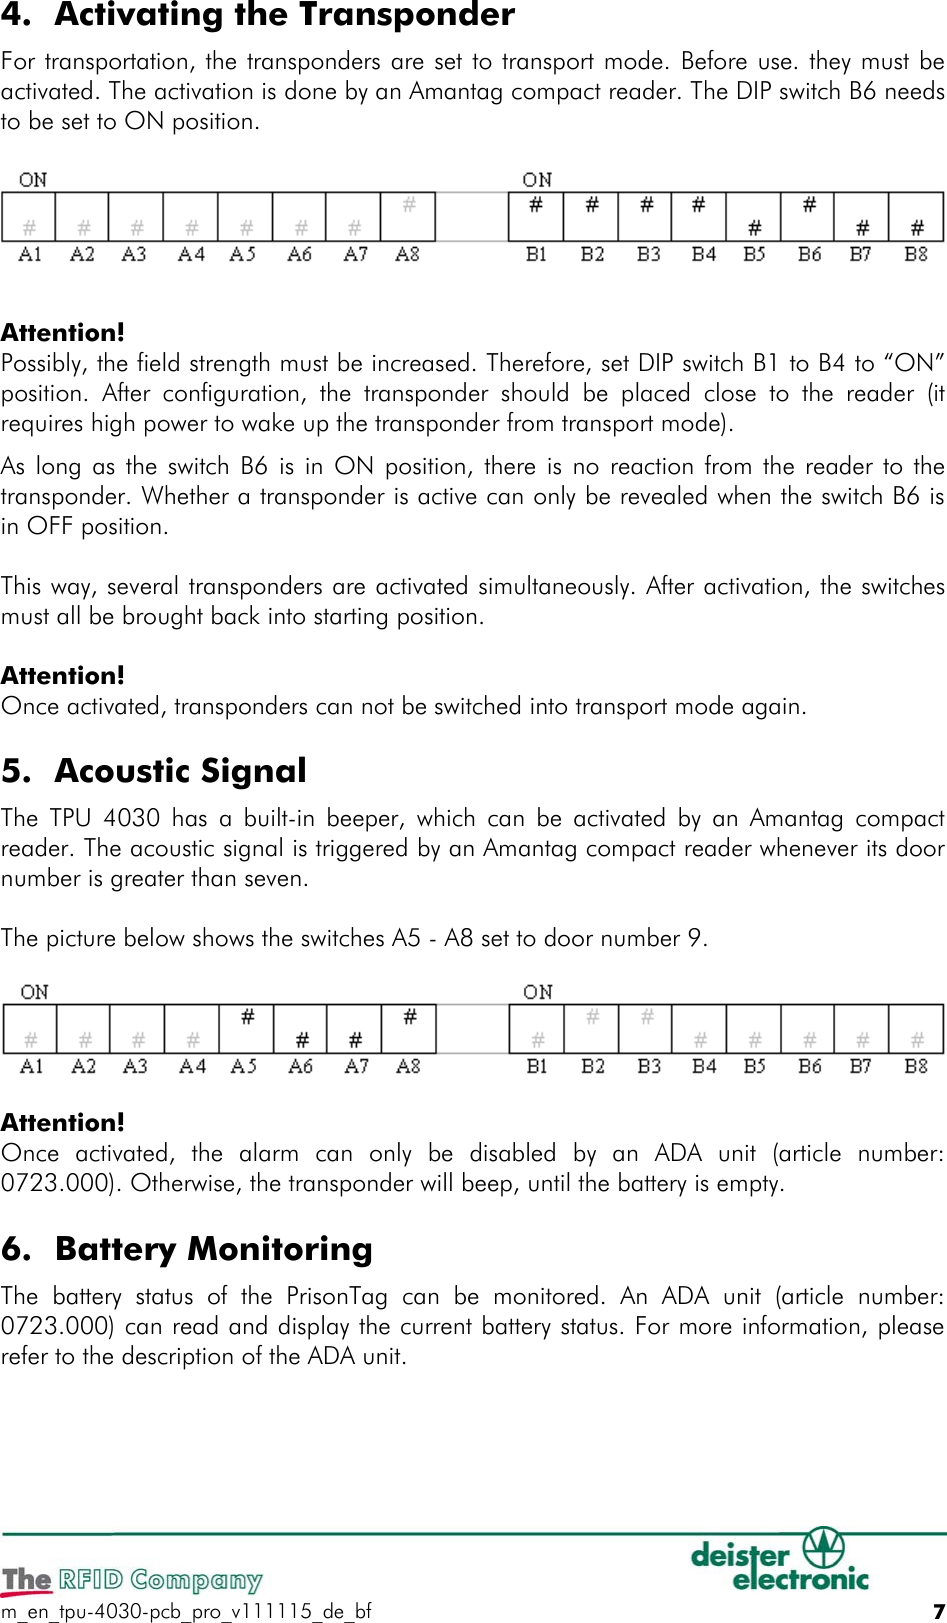 4. Activating the TransponderFor transportation, the transponders are set to transport mode. Before use. they must be activated. The activation is done by an Amantag compact reader. The DIP switch B6 needs to be set to ON position.Attention!Possibly, the field strength must be increased. Therefore, set DIP switch B1 to B4 to “ON” position. After configuration, the transponder should be placed close to the reader  (it requires high power to wake up the transponder from transport mode). As long as the switch B6 is in ON position, there is no reaction from the reader to the transponder. Whether a transponder is active can only be revealed when the switch B6 is in OFF position.This way, several transponders are activated simultaneously. After activation, the switches must all be brought back into starting position.Attention!Once activated, transponders can not be switched into transport mode again.5. Acoustic SignalThe TPU 4030 has a built-in beeper, which can be activated by an Amantag compact reader. The acoustic signal is triggered by an Amantag compact reader whenever its door number is greater than seven.The picture below shows the switches A5 - A8 set to door number 9.Attention!Once  activated,  the  alarm  can  only  be  disabled  by  an  ADA  unit  (article  number: 0723.000). Otherwise, the transponder will beep, until the battery is empty.6. Battery MonitoringThe  battery  status  of  the  PrisonTag  can be  monitored.  An  ADA  unit  (article  number: 0723.000) can read and display the current battery status. For more information, please refer to the description of the ADA unit.m_en_tpu-4030-pcb_pro_v111115_de_bf 7